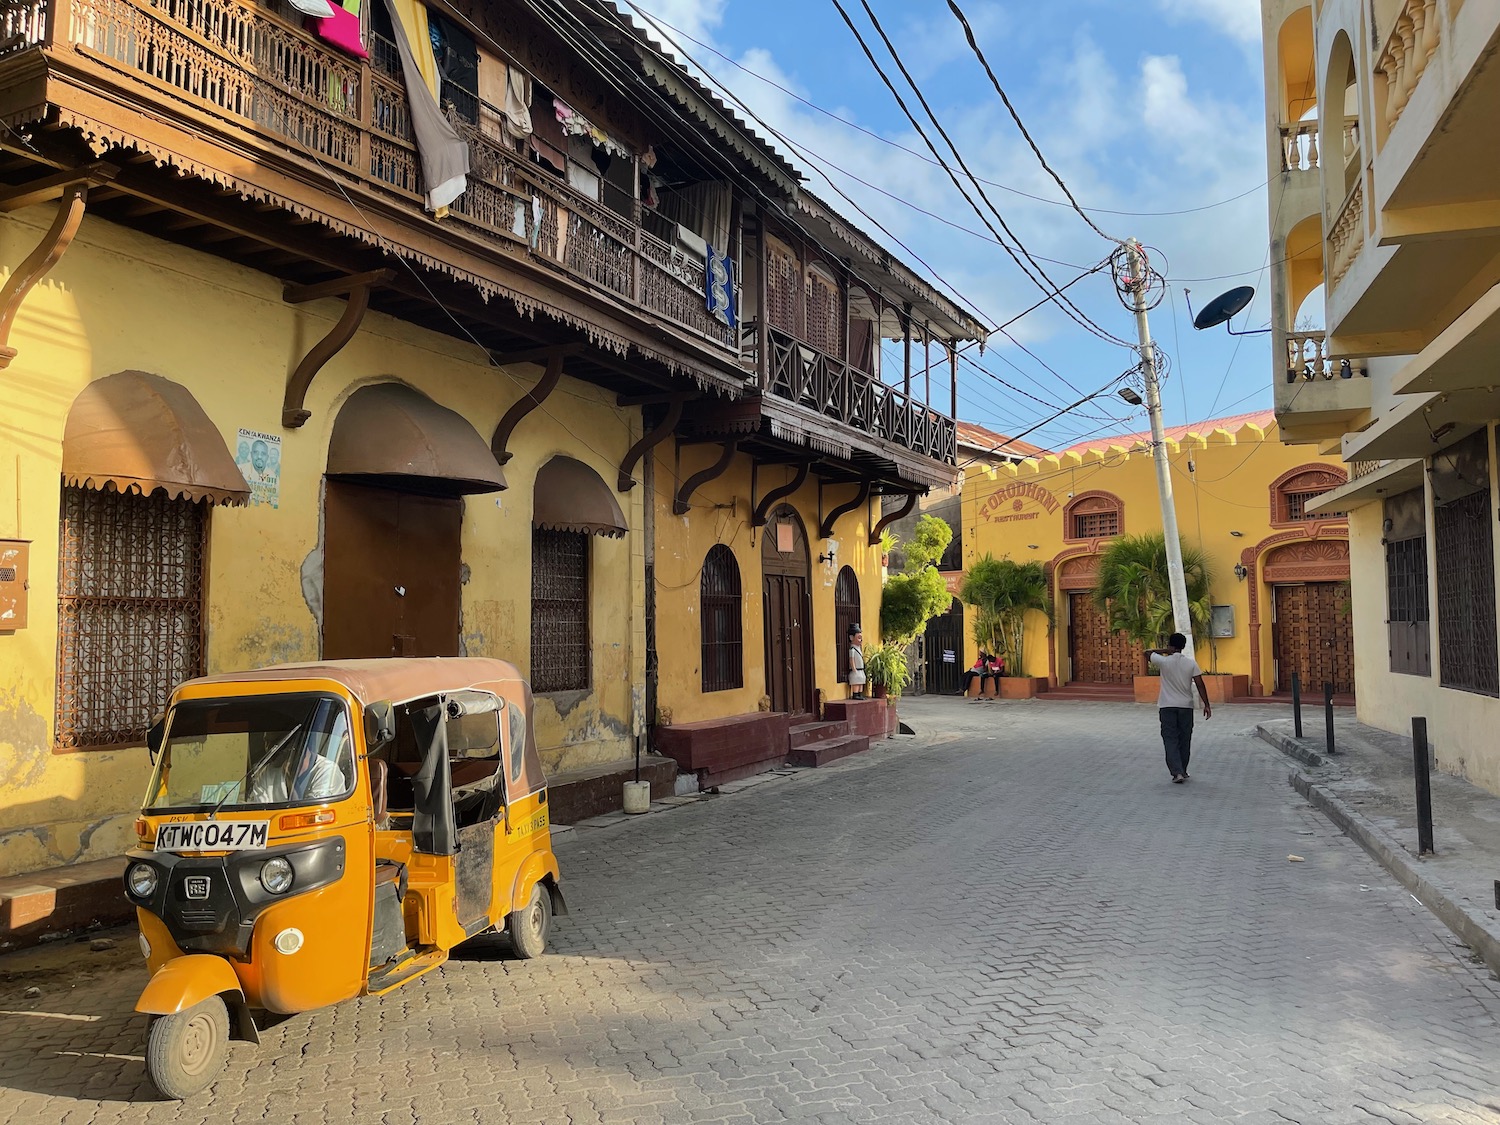 a yellow vehicle parked on a street with buildings and a person walking